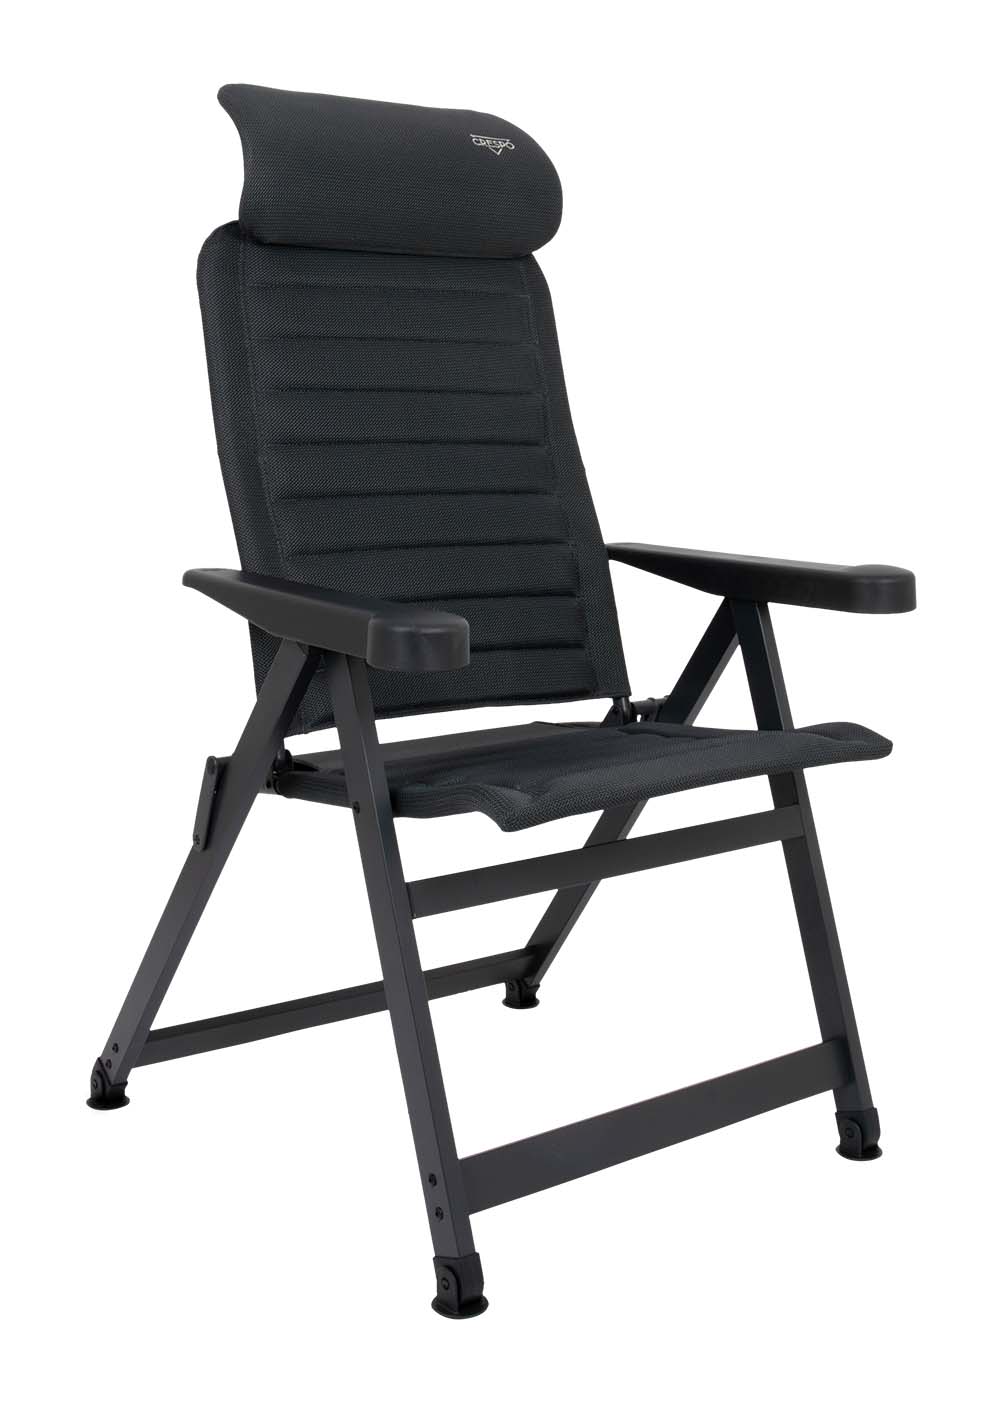 1149500 An ergonomic 7-position adjustable stand-up chair. The chair is designed in a square frame and equipped with stabilization feet so that the chair is always stable. In addition, the chair is equipped with an adjustable headrest. The comfortable and chic upholstery is extra breathable and does not retain moisture due to its open cell structure. This makes the chair dry much faster than chairs with traditional foam padding. This chair has a lower seat and a shorter back. This makes this chair ideal for people with shorter legs. Provides maximum comfort with the 7-position adjustable backrest. Both the backrest and armrests are ergonomically shaped. The chair features an anodized H-frame for added stability and strength. Due to its unique design and lower seat, this chair is compact and easy to carry.